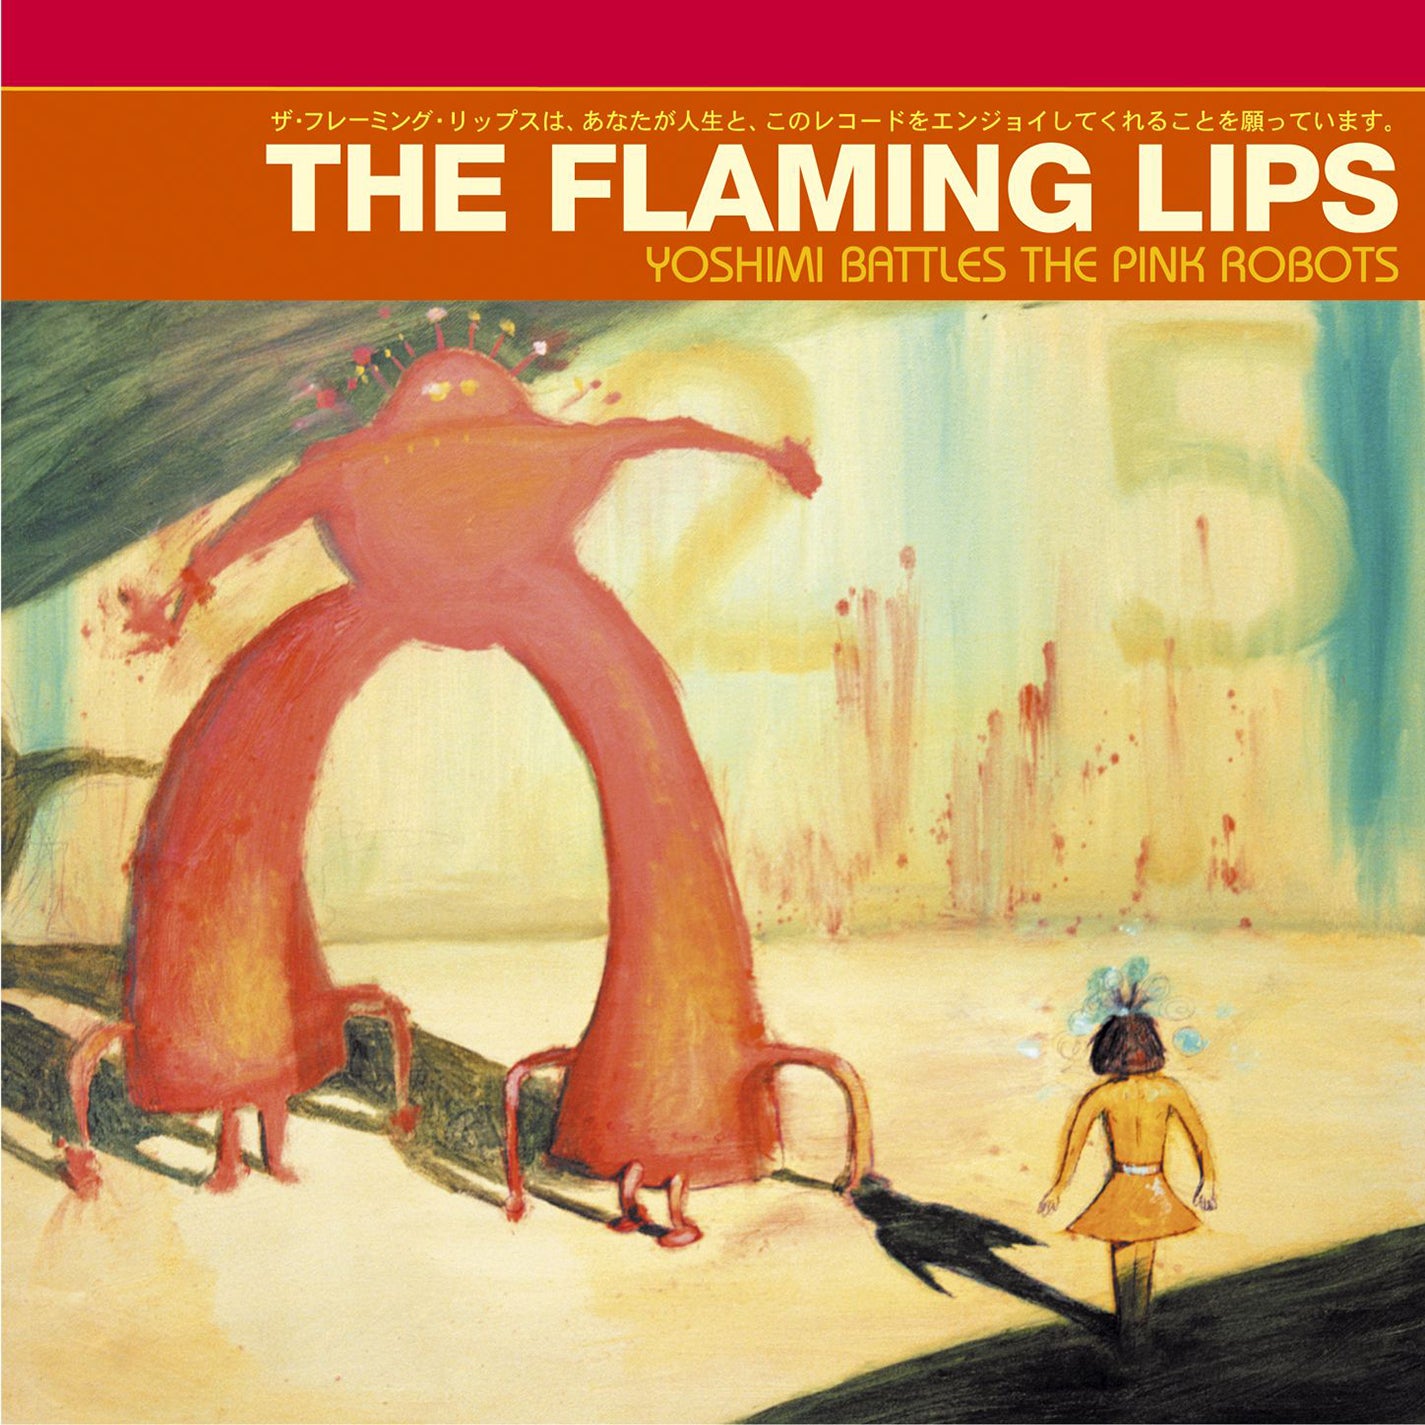 The Flaming Lips - Yoshimi Battles The Pink Robots [Picture Disc]